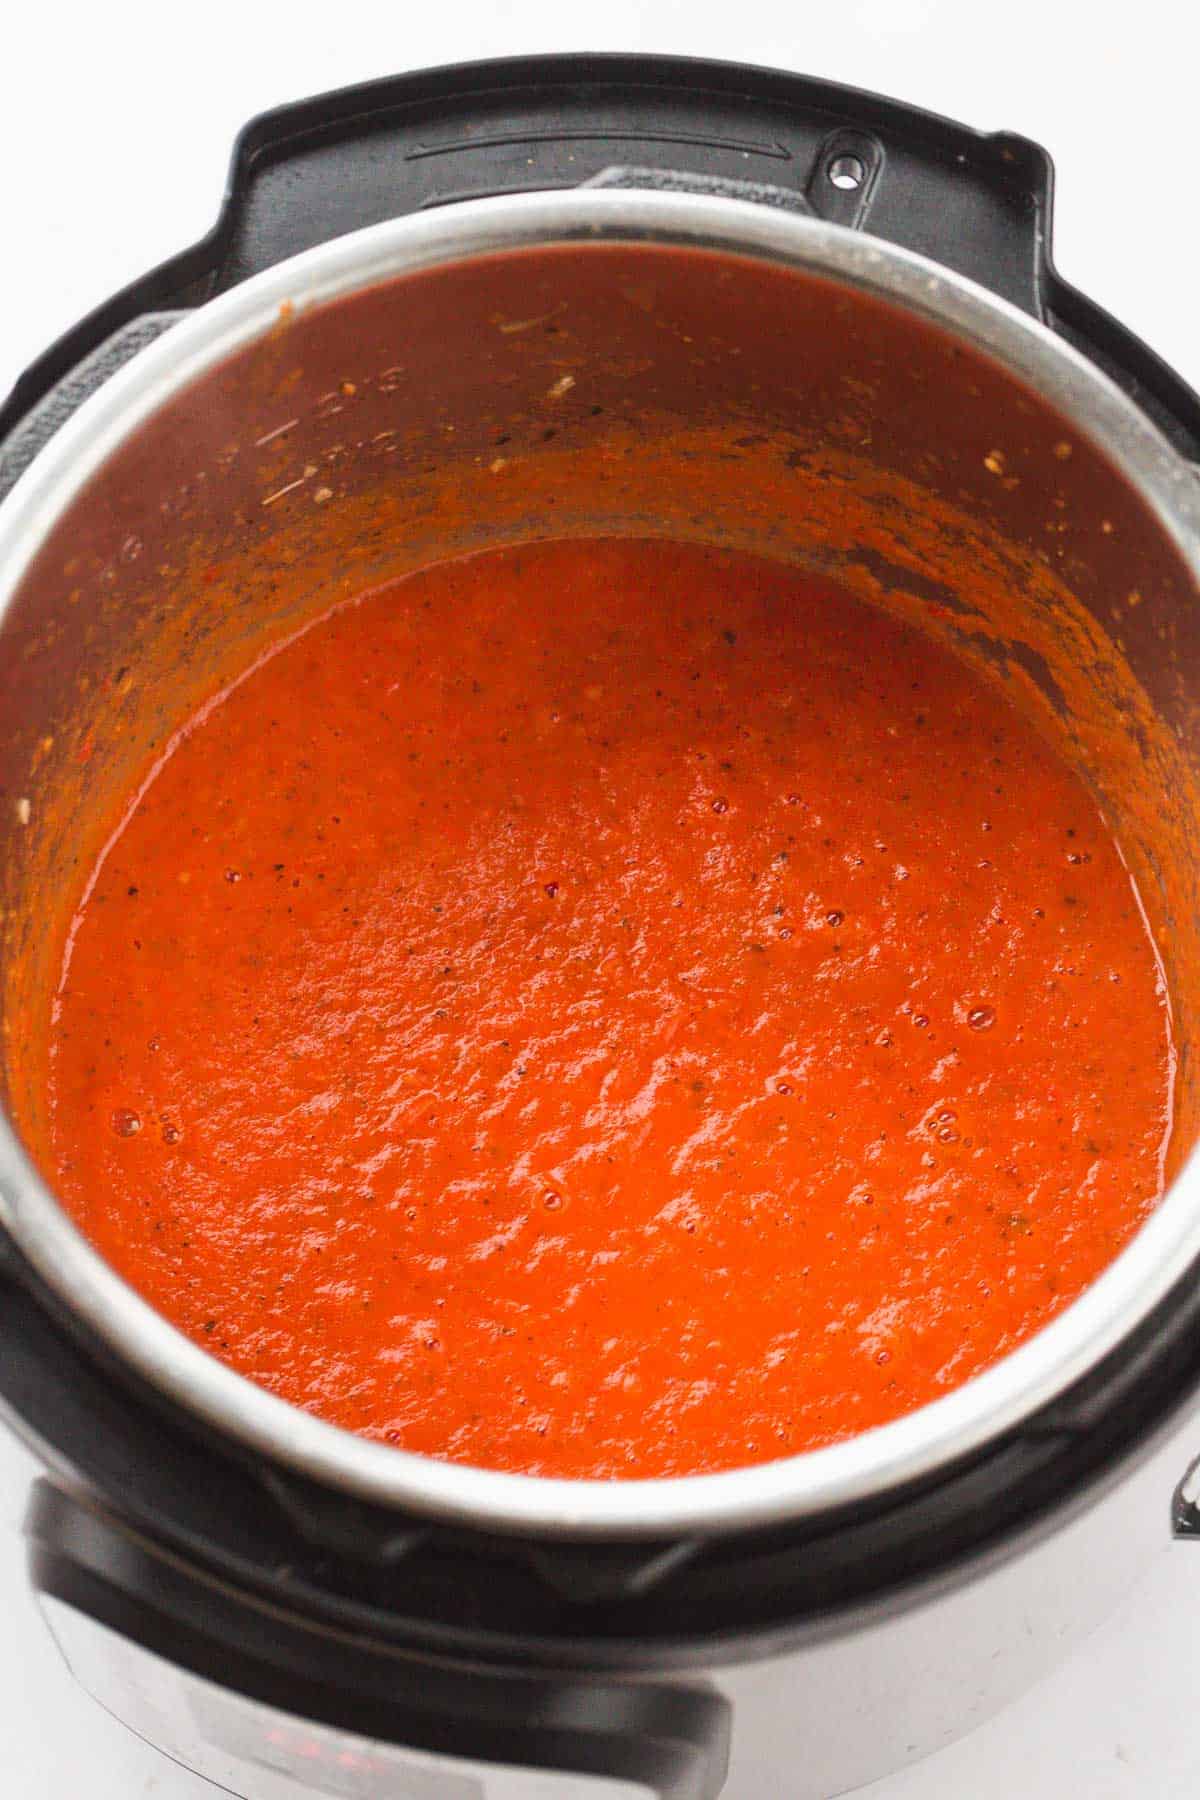 Blended marinara sauce in the instant pot